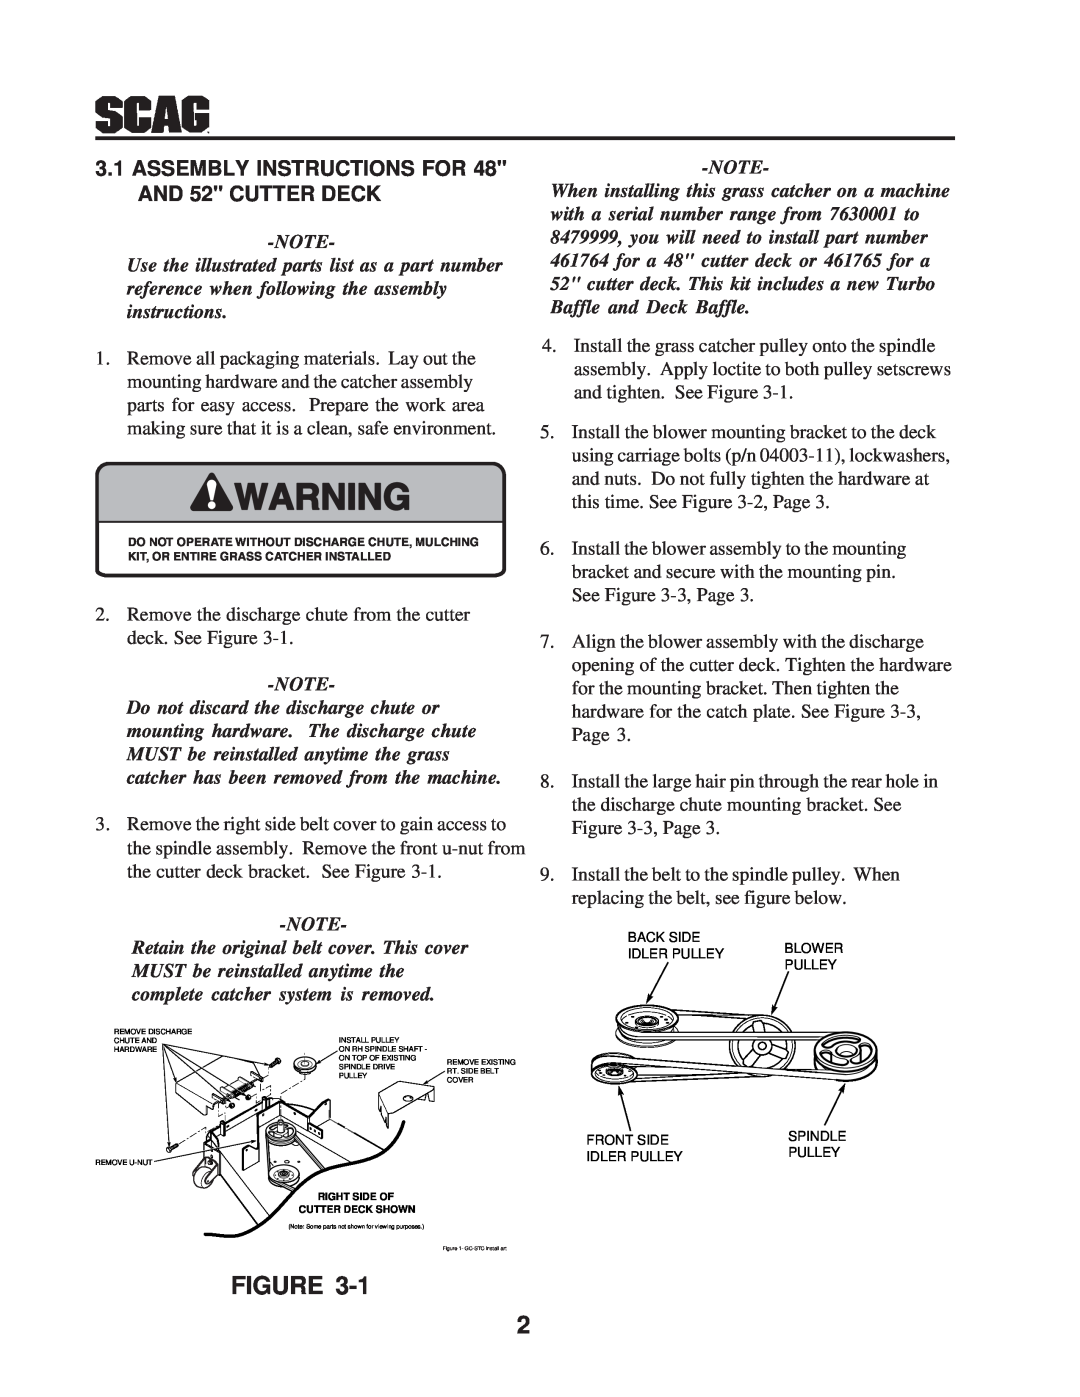 Scag Power Equipment GC-STC manual ASSEMBLY INSTRUCTIONS FOR 48 AND 52 CUTTER DECK 